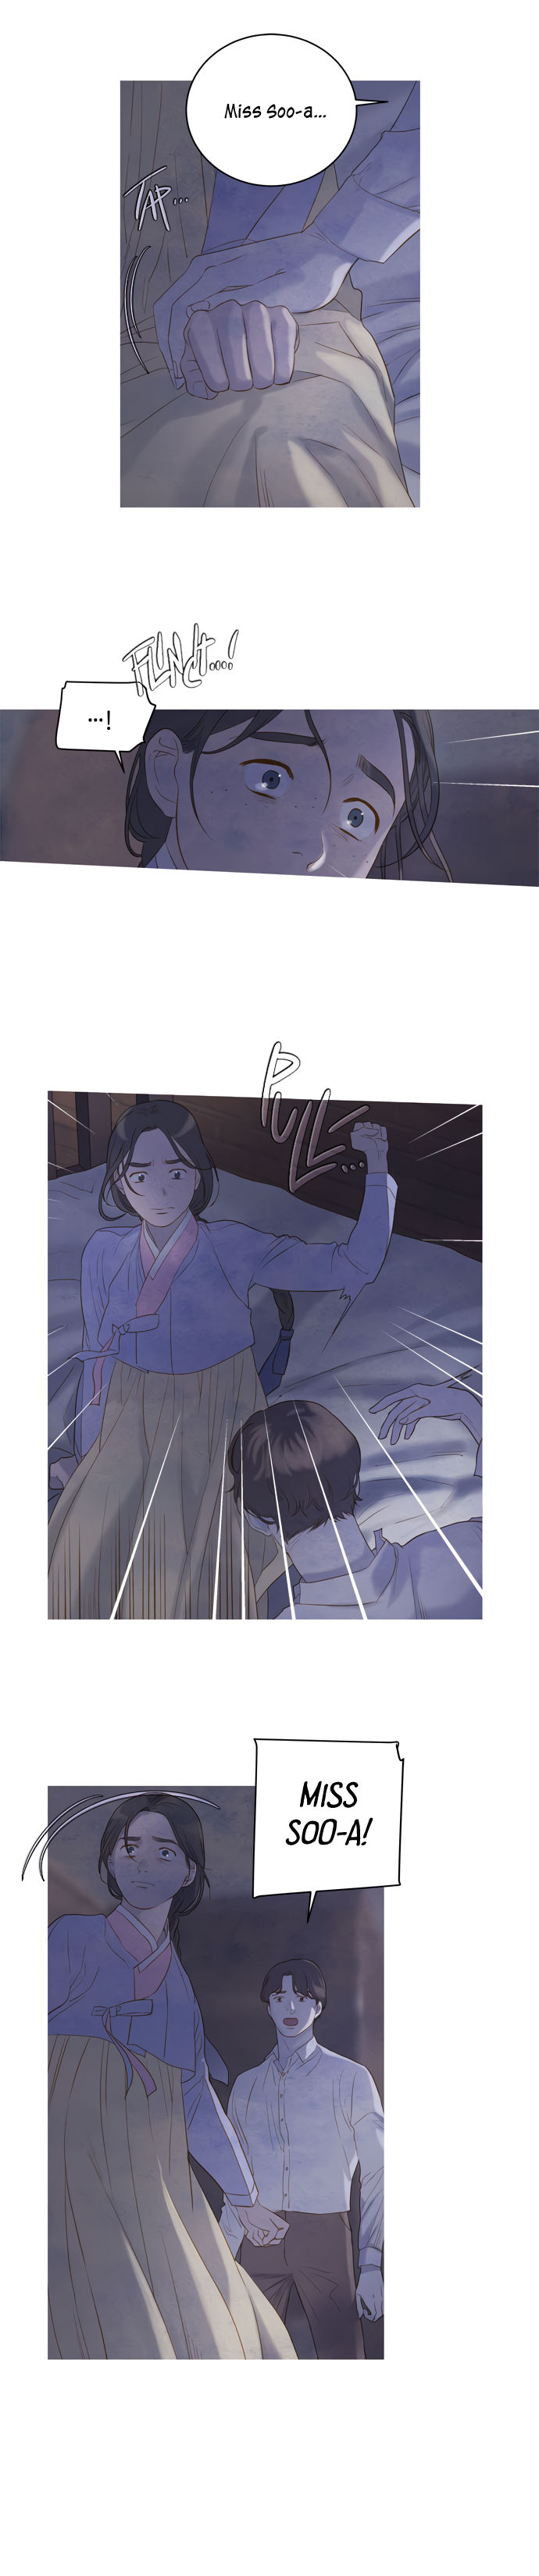 Gorae Byul - The Gyeongseong Mermaid - Chapter 19 Page 9